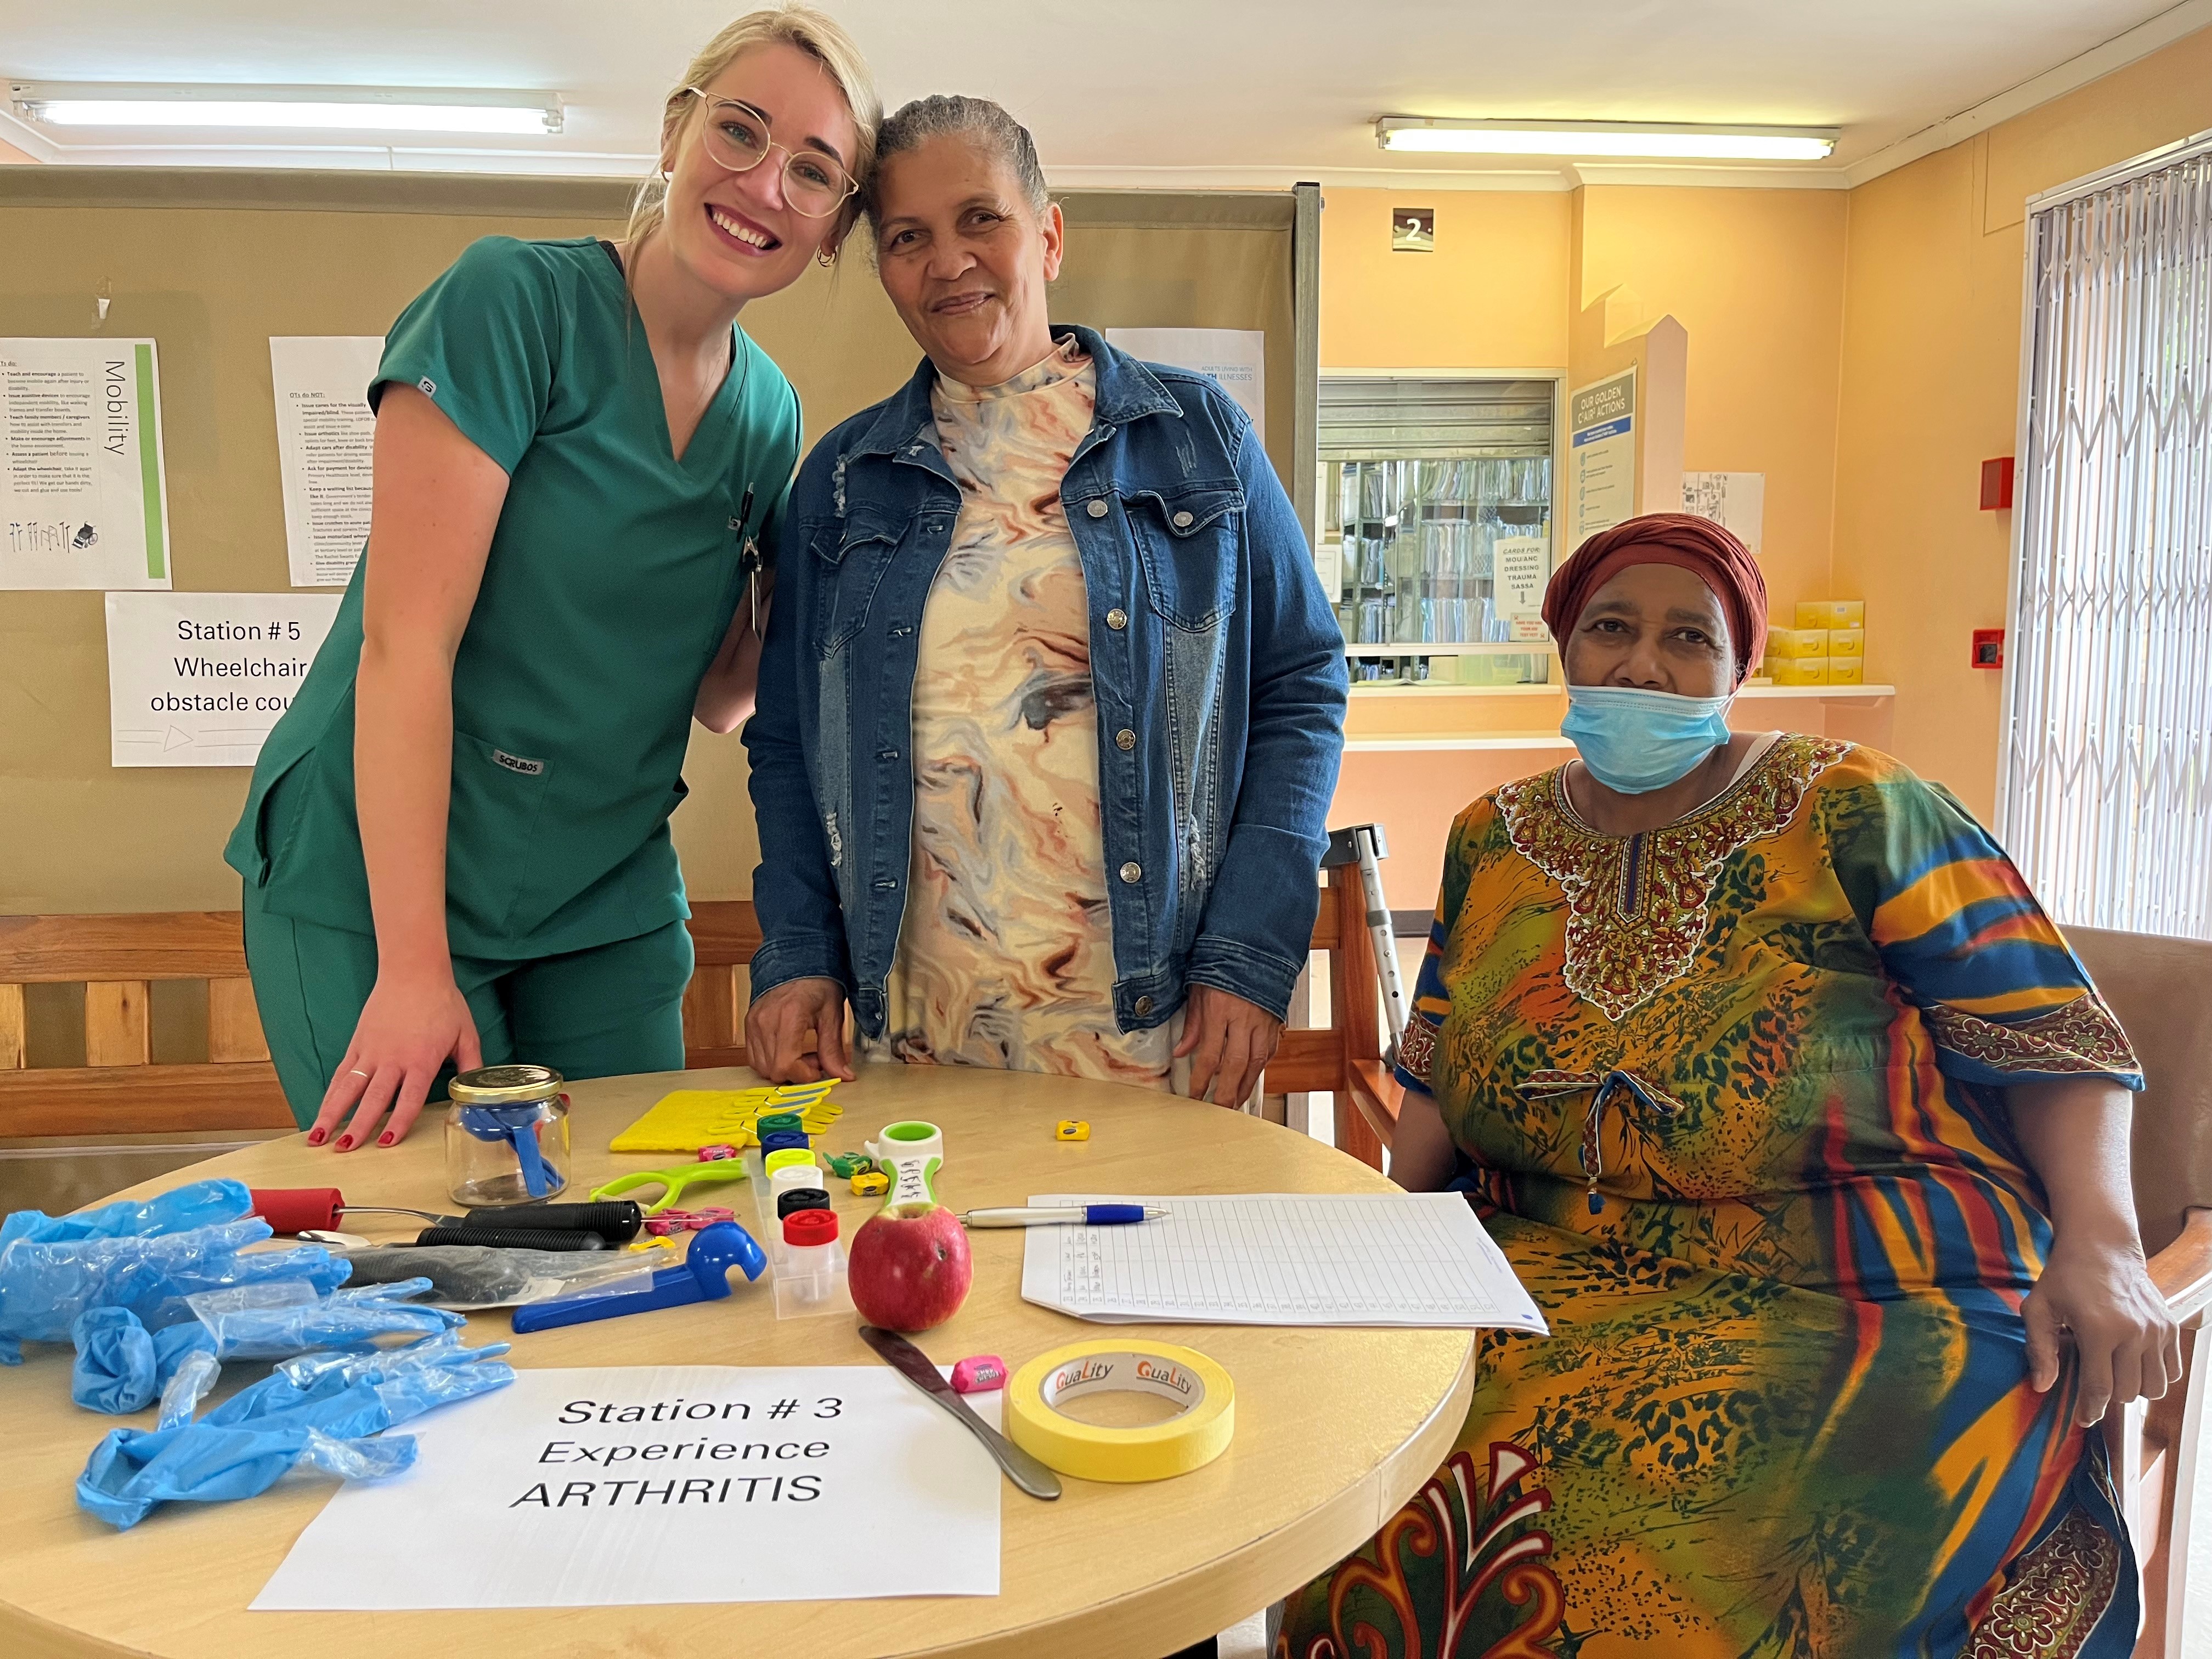 Bellville South OT Heidi Gouws pictured with patients Rachel Davids and Safieja Cloete at the “arthritis experience station” at Kraaifontein CHC.​​